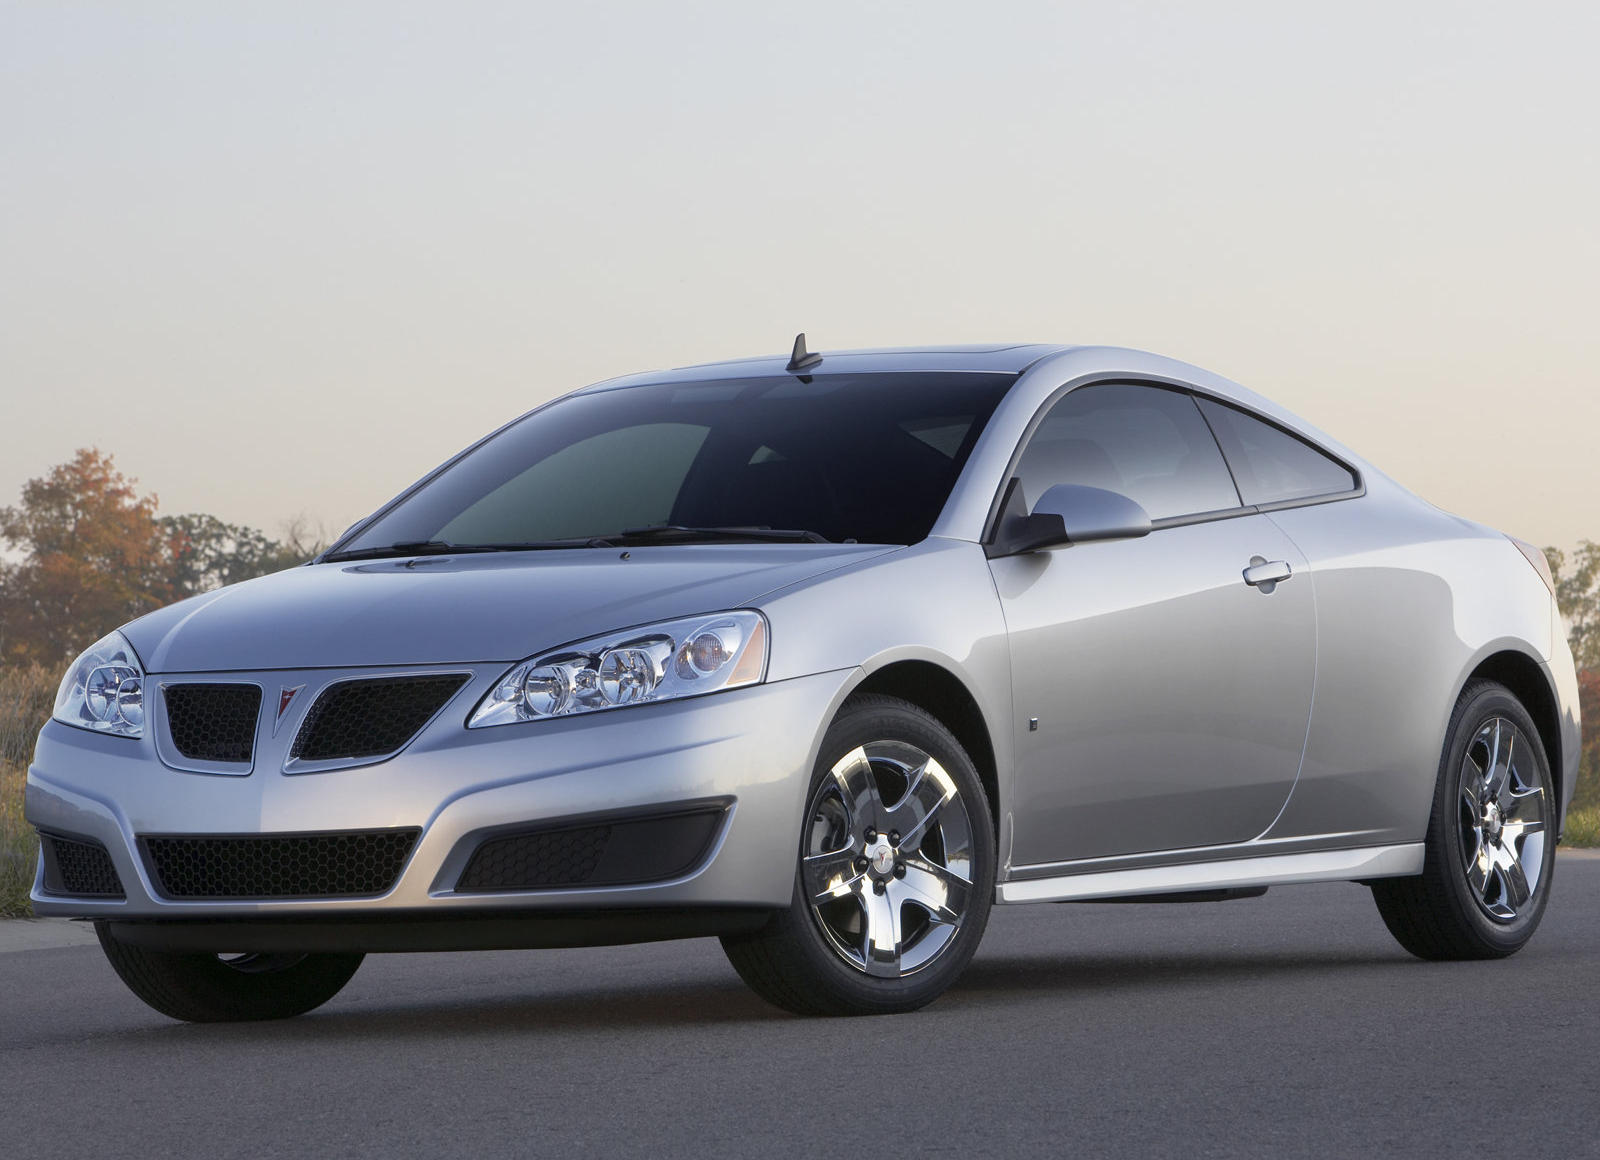 2009 Pontiac G6 Coupe Front Angle View